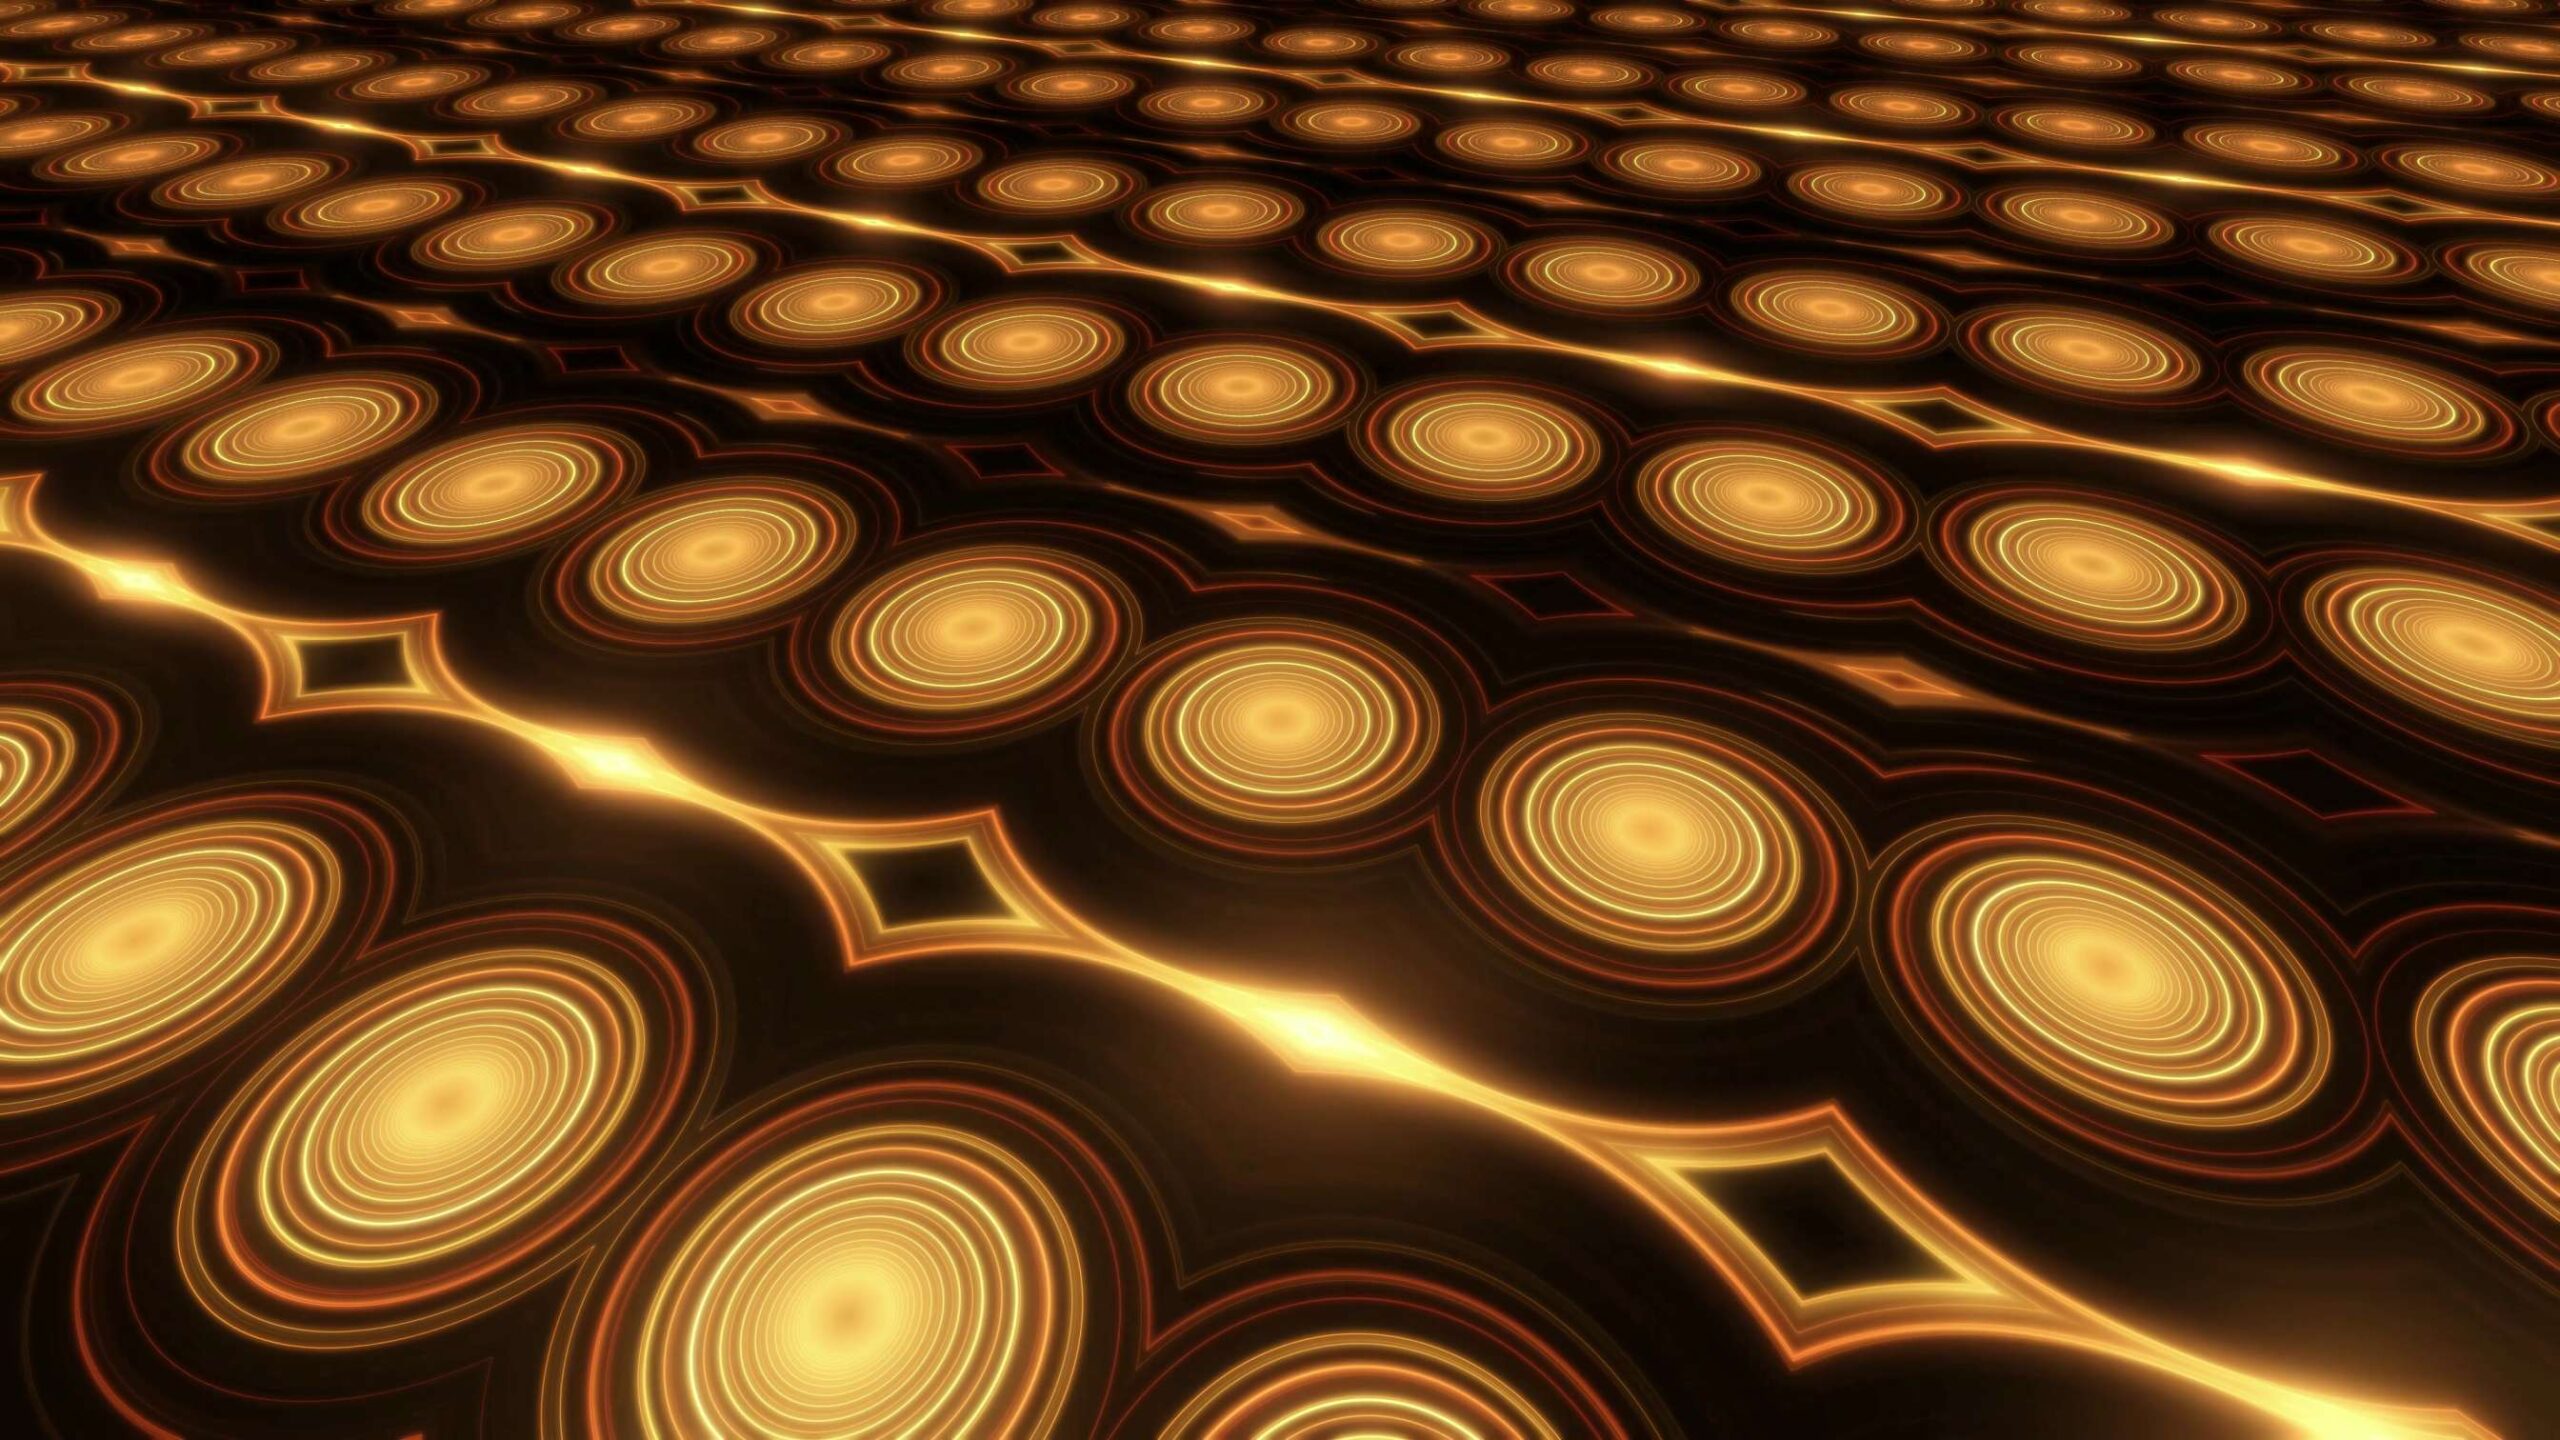 4K Glowing Golden Circles Motion Background || VFX Free To Use 4K Screensaver || Free Download